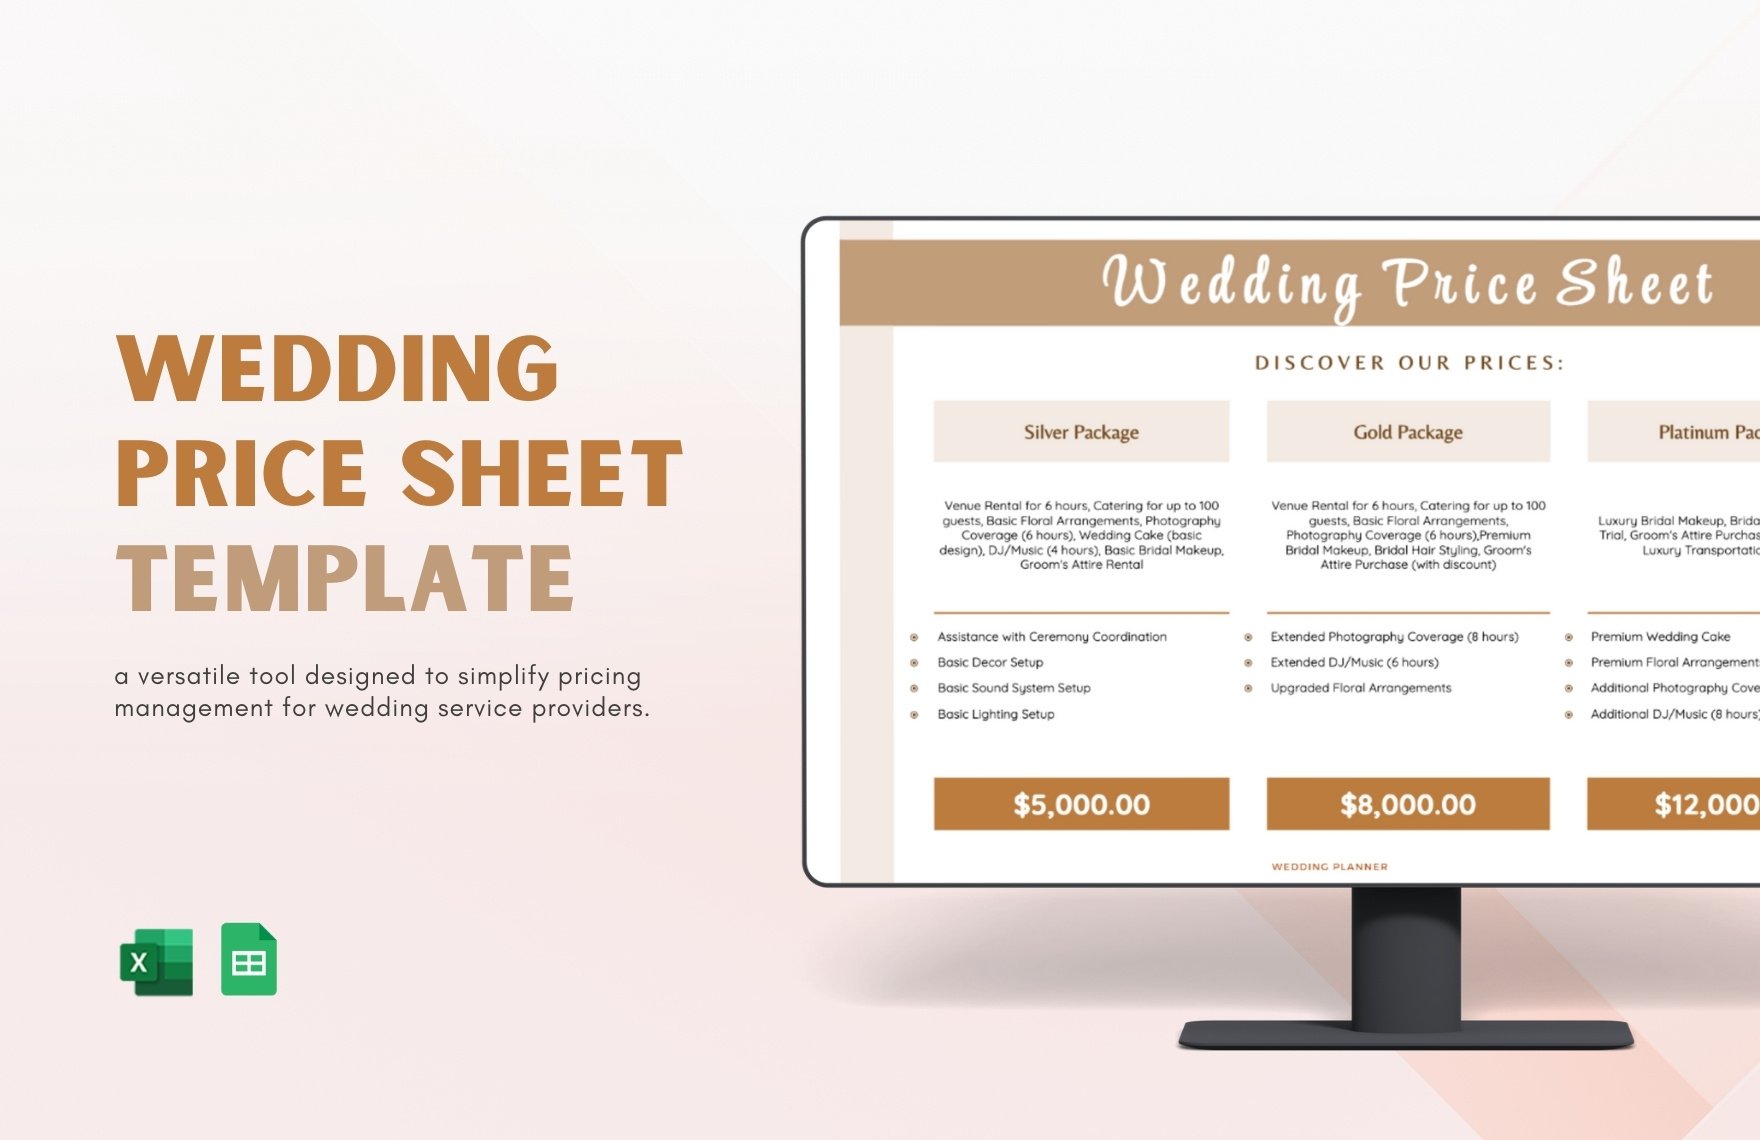 Wedding Price Sheet Template in Excel, Google Sheets